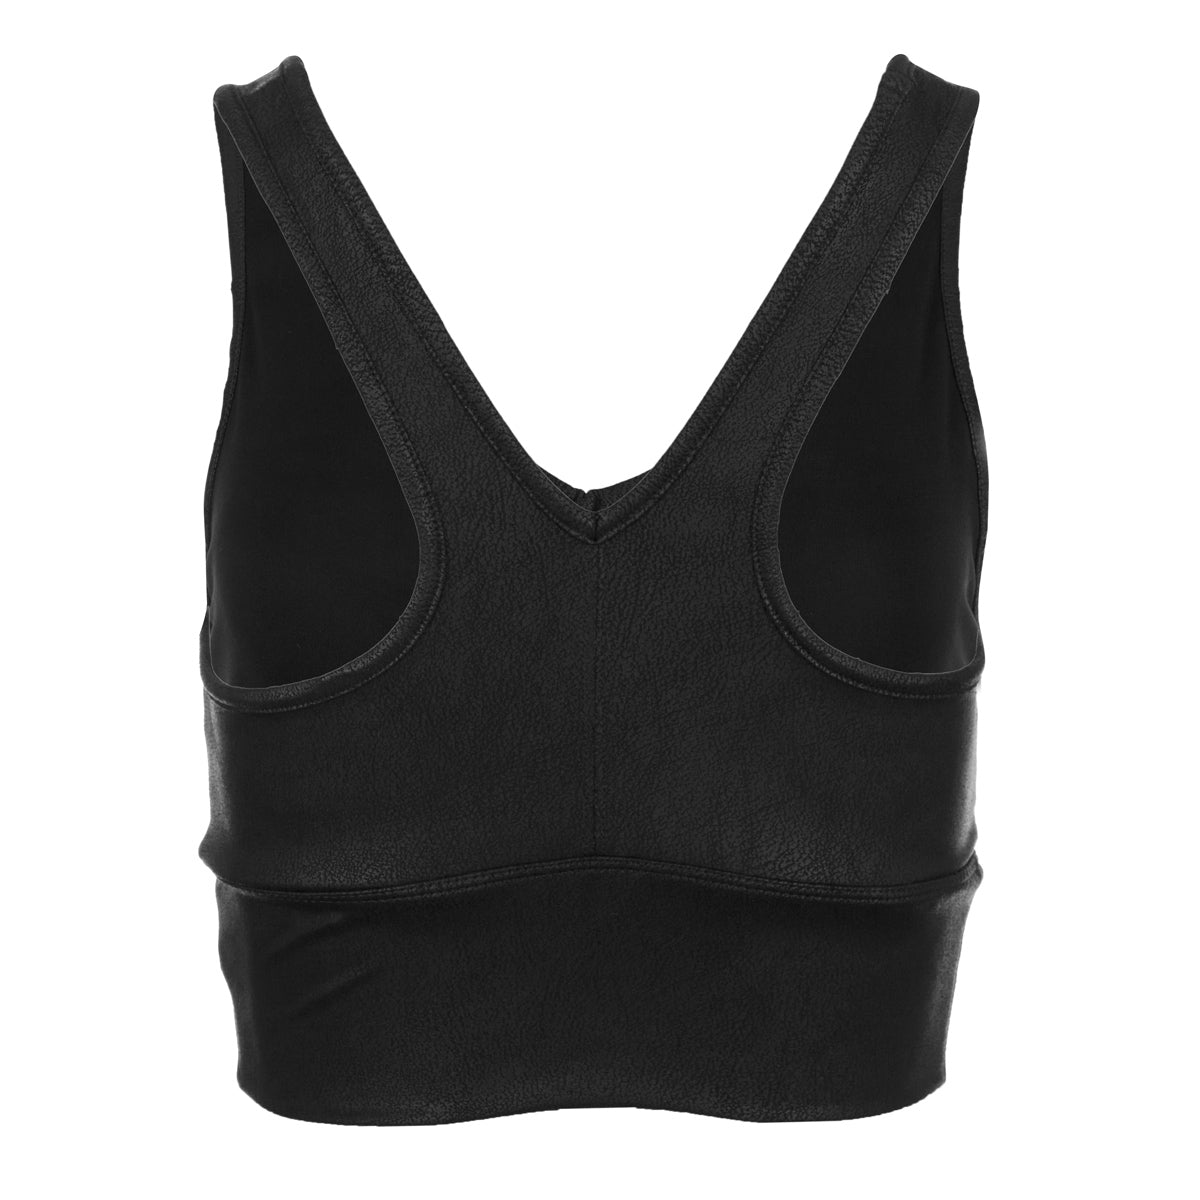 90 Degree By Reflex Women' Cropped Tank Top with Back Keyhole